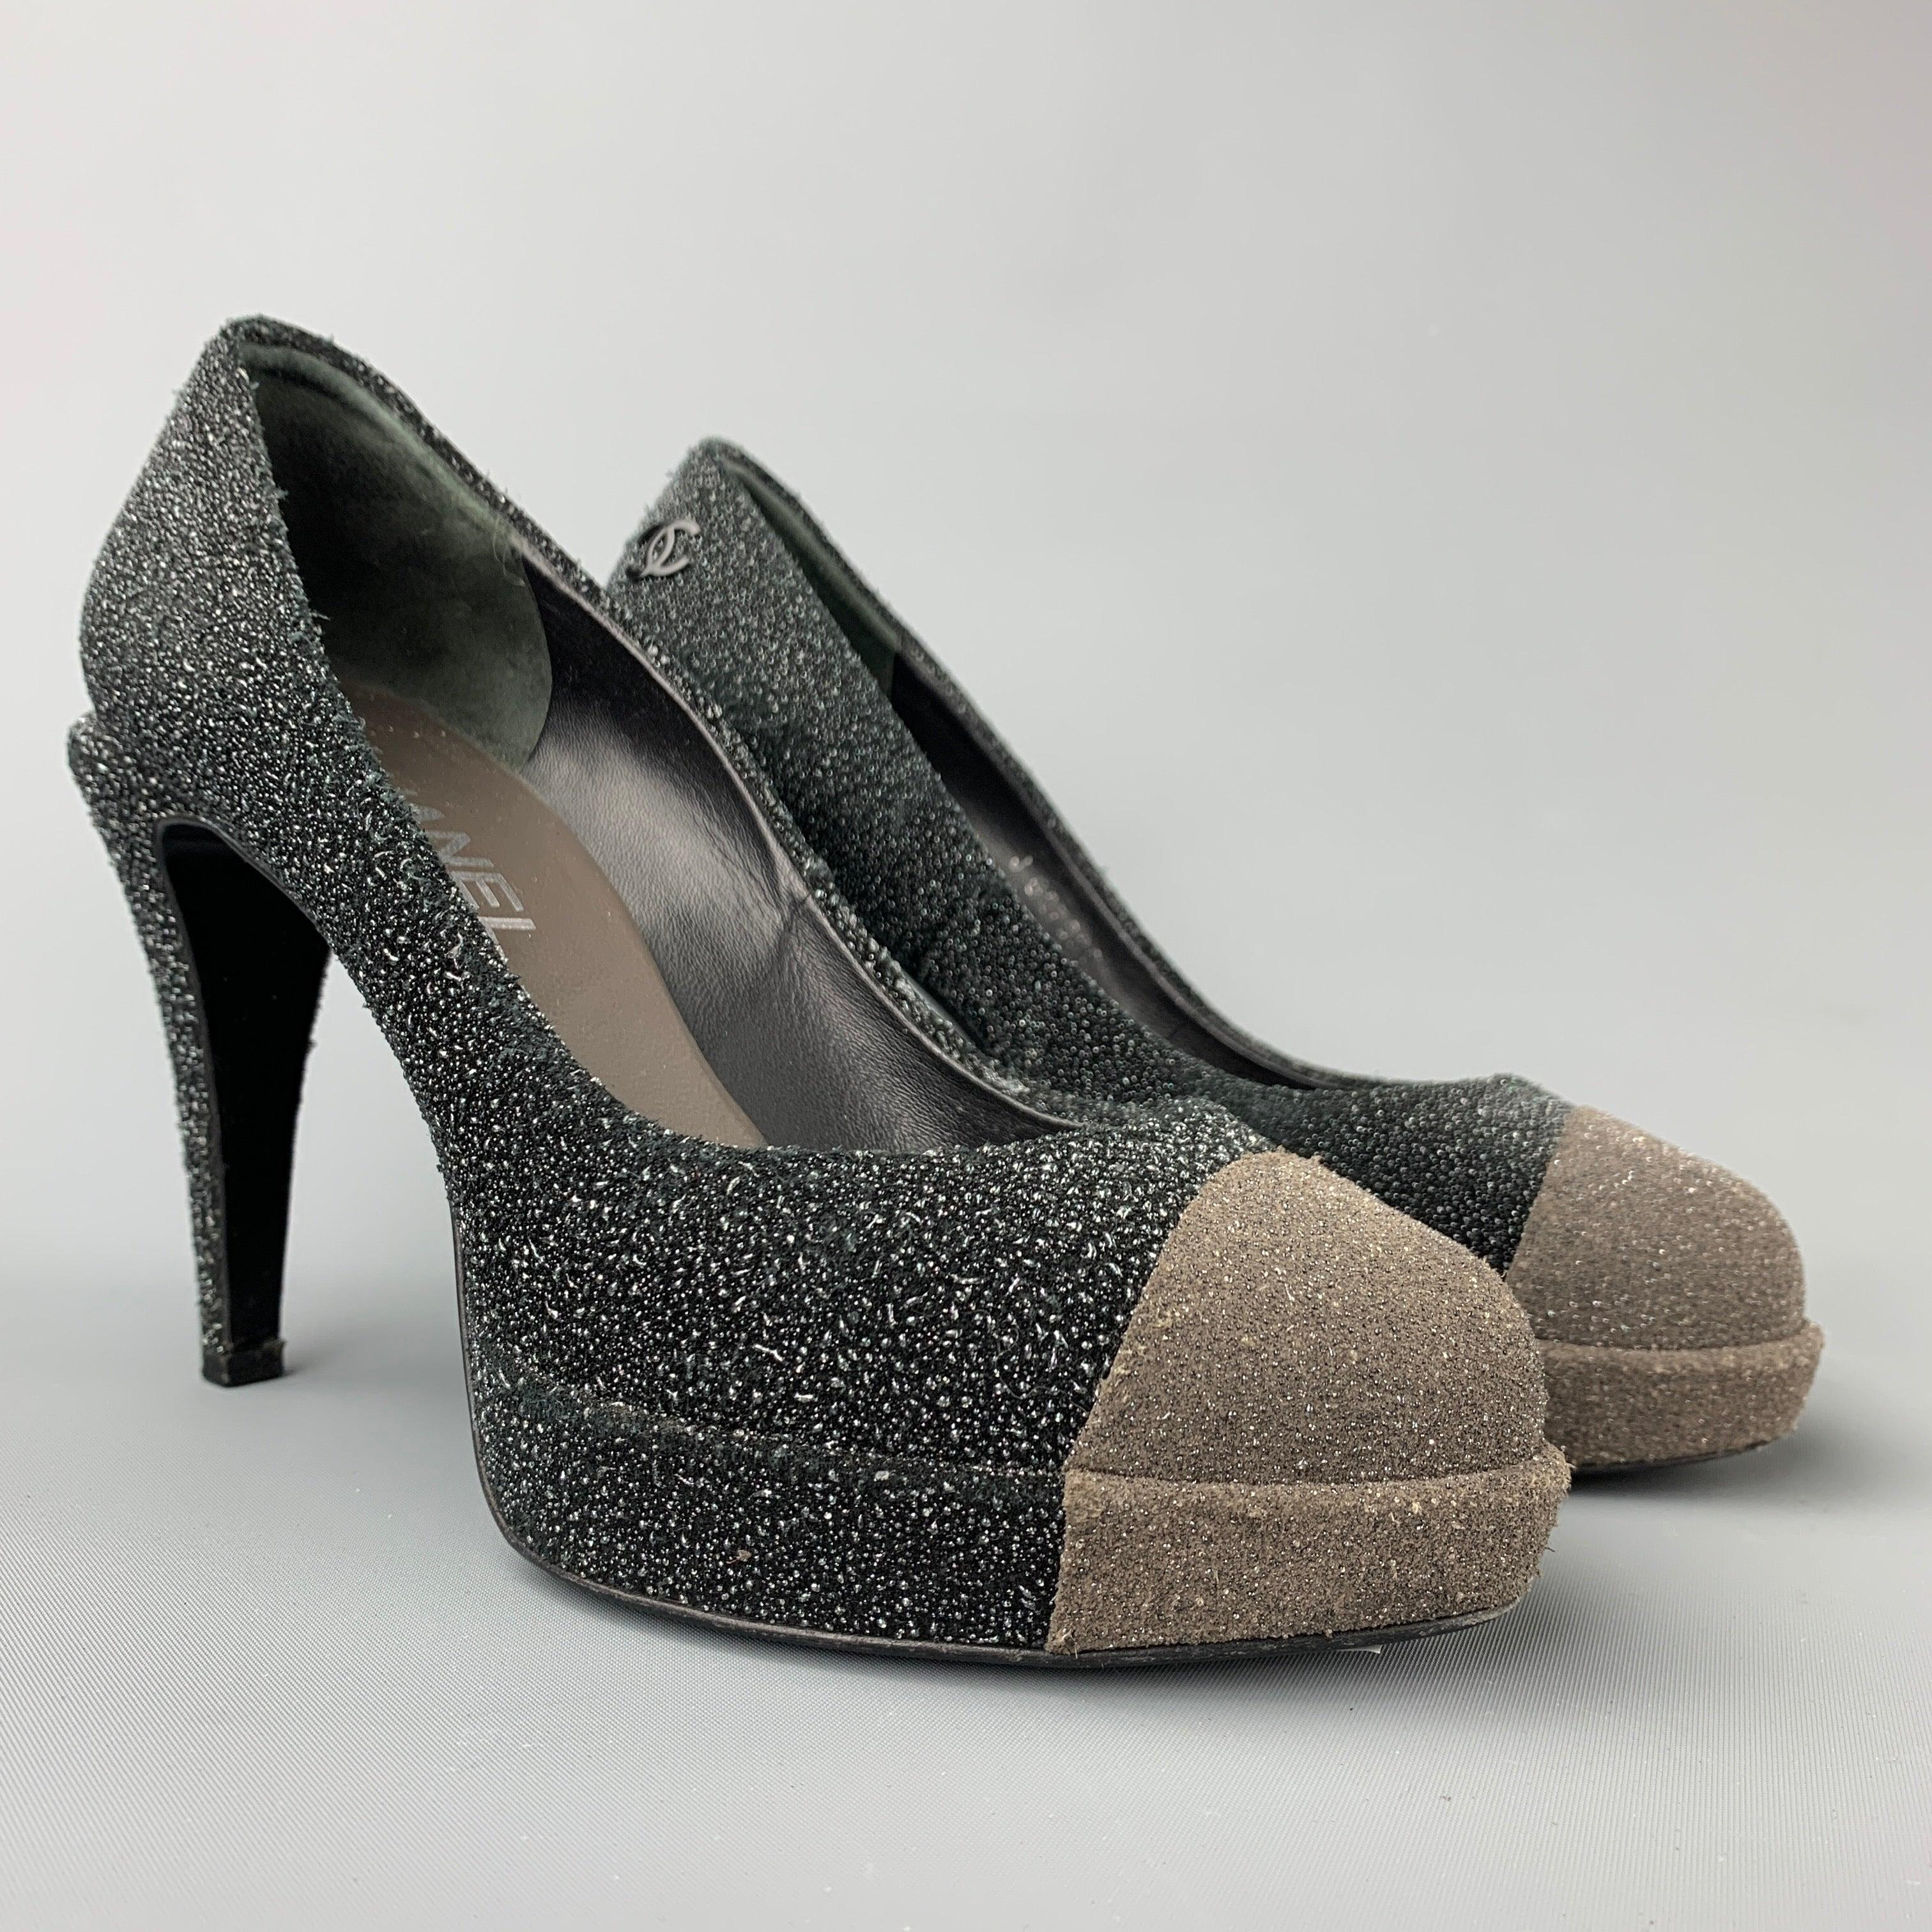 CHANEL pumps comes in a charcoal & grey sparkle textured material featuring a chanel logo detail, platform,and a stacked heel. Made in Italy.Very Good
Pre-Owned Condition. 

Marked:   EU 37 

Measurements: 
  Heel: 4 inches Platform: 0.5 inches 
  
